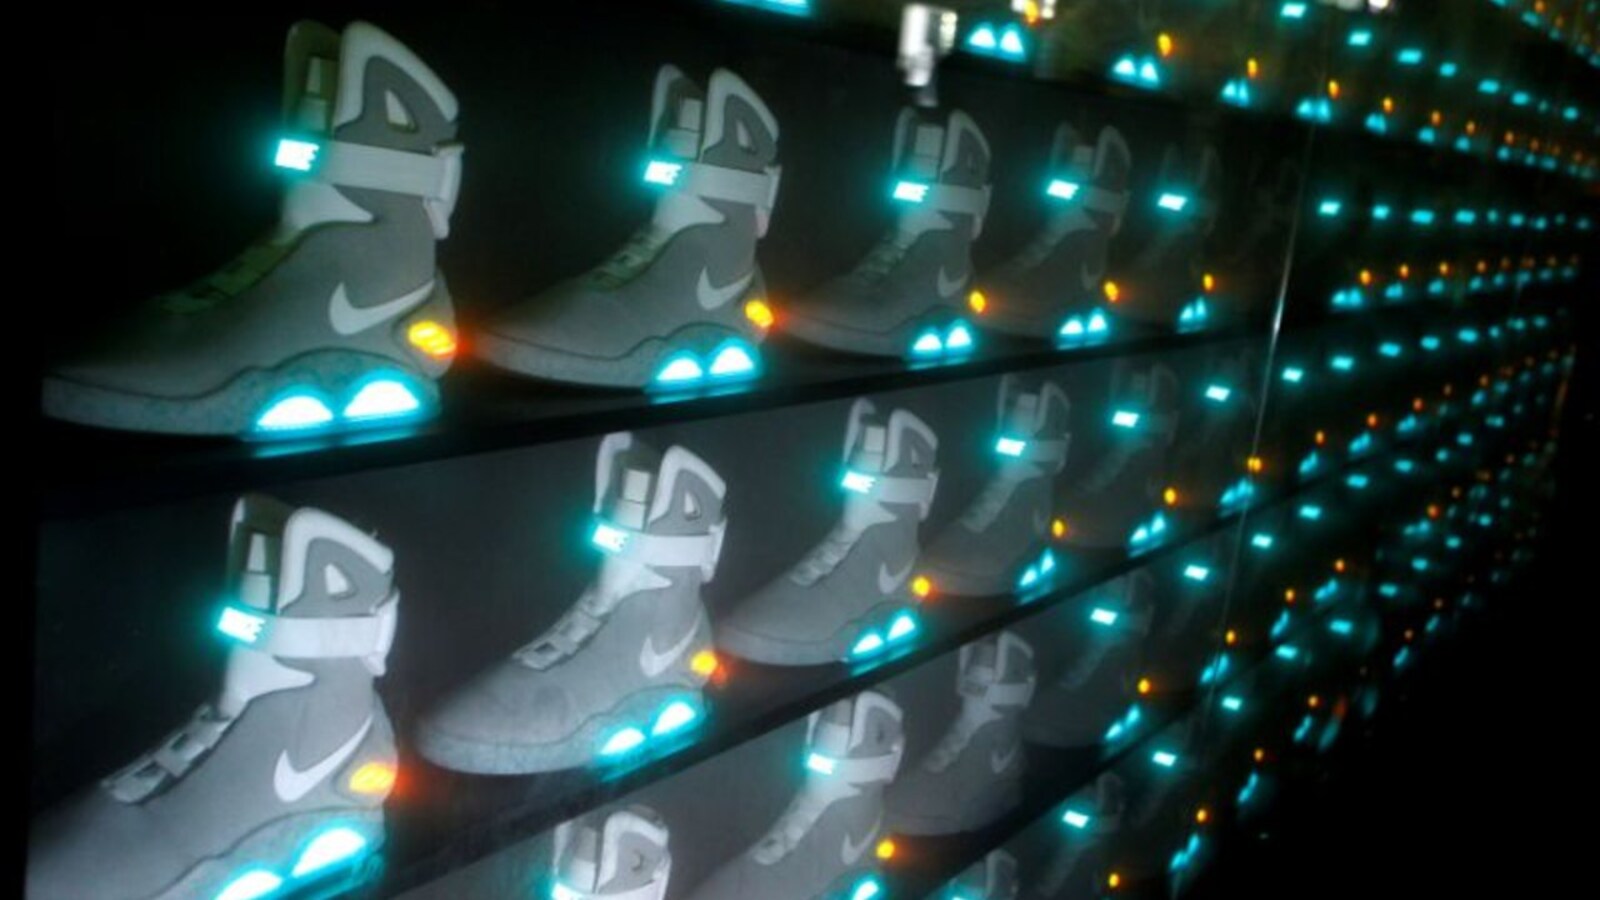 Nike's Back to Future sneakers expected to fetch Rs 48 lakh bid at Sotheby's